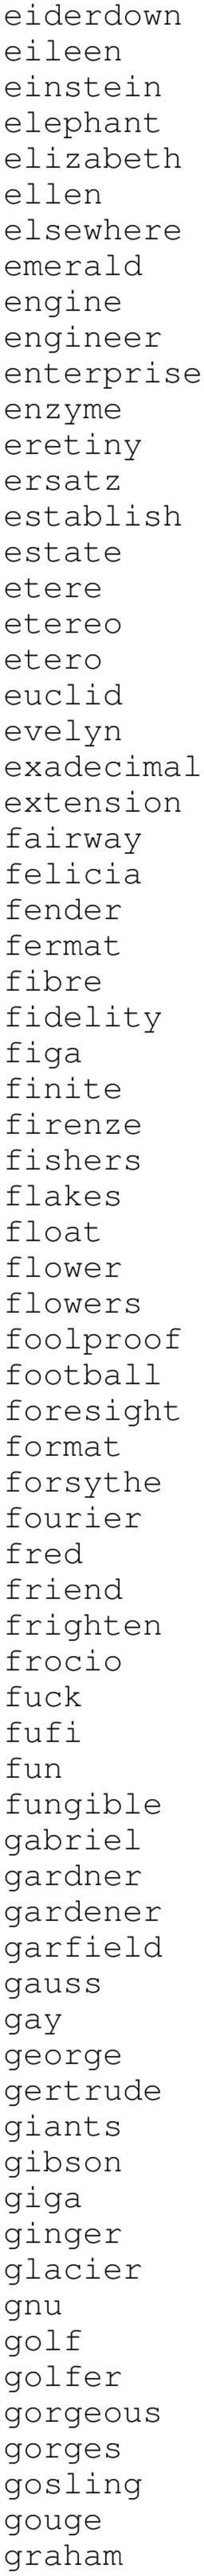 float flower flowers foolproof football foresight format forsythe fourier fred friend frighten frocio fuck fufi fun fungible gabriel